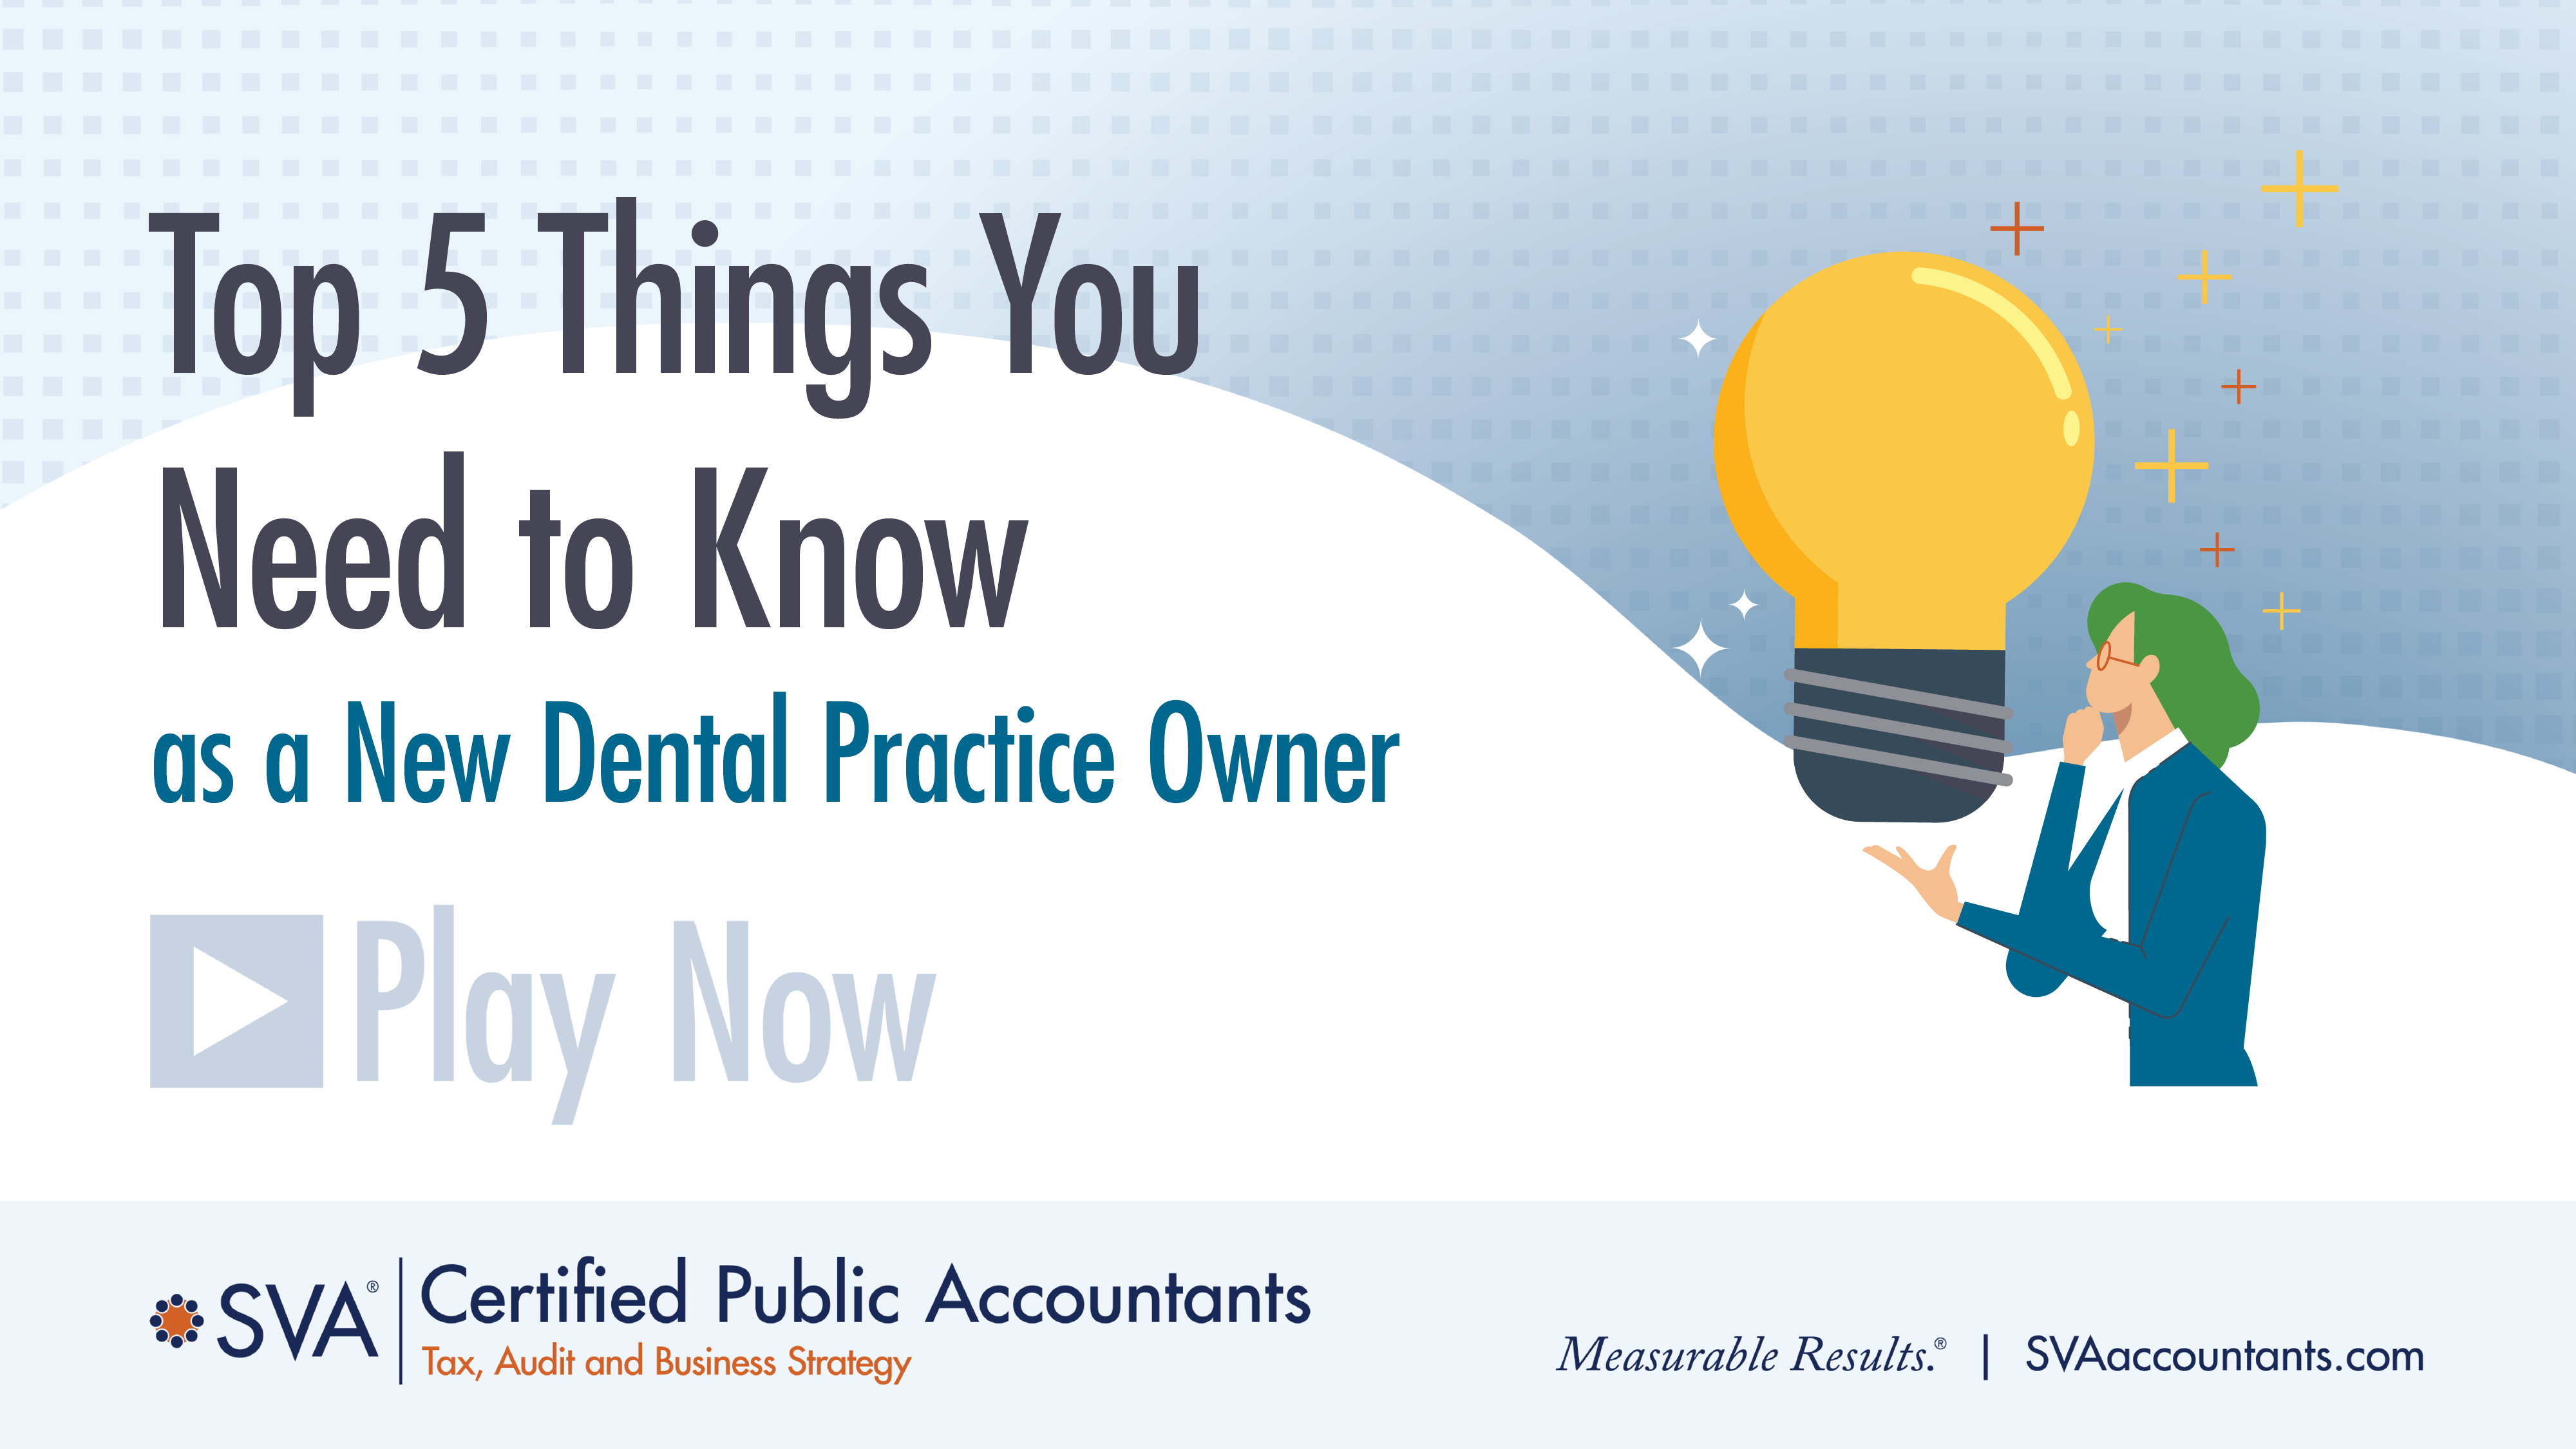 Top 5 Things You Need to Know as a New Dental Practice Owner